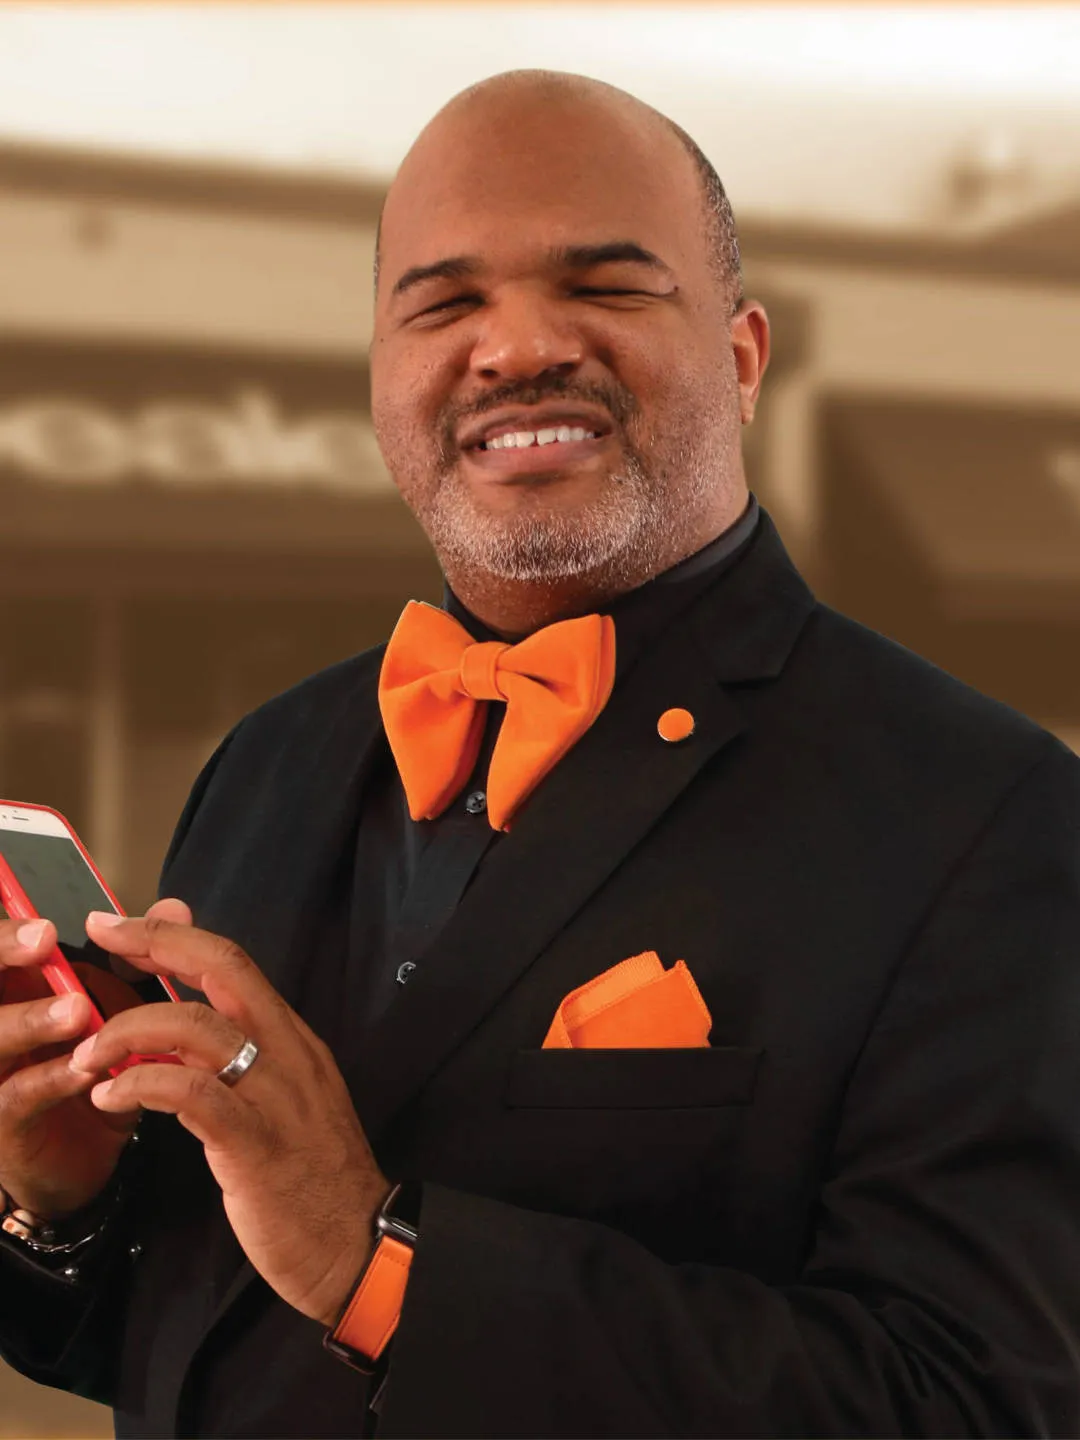 LA Williams an African American man wearing a black suit and orange bow tie